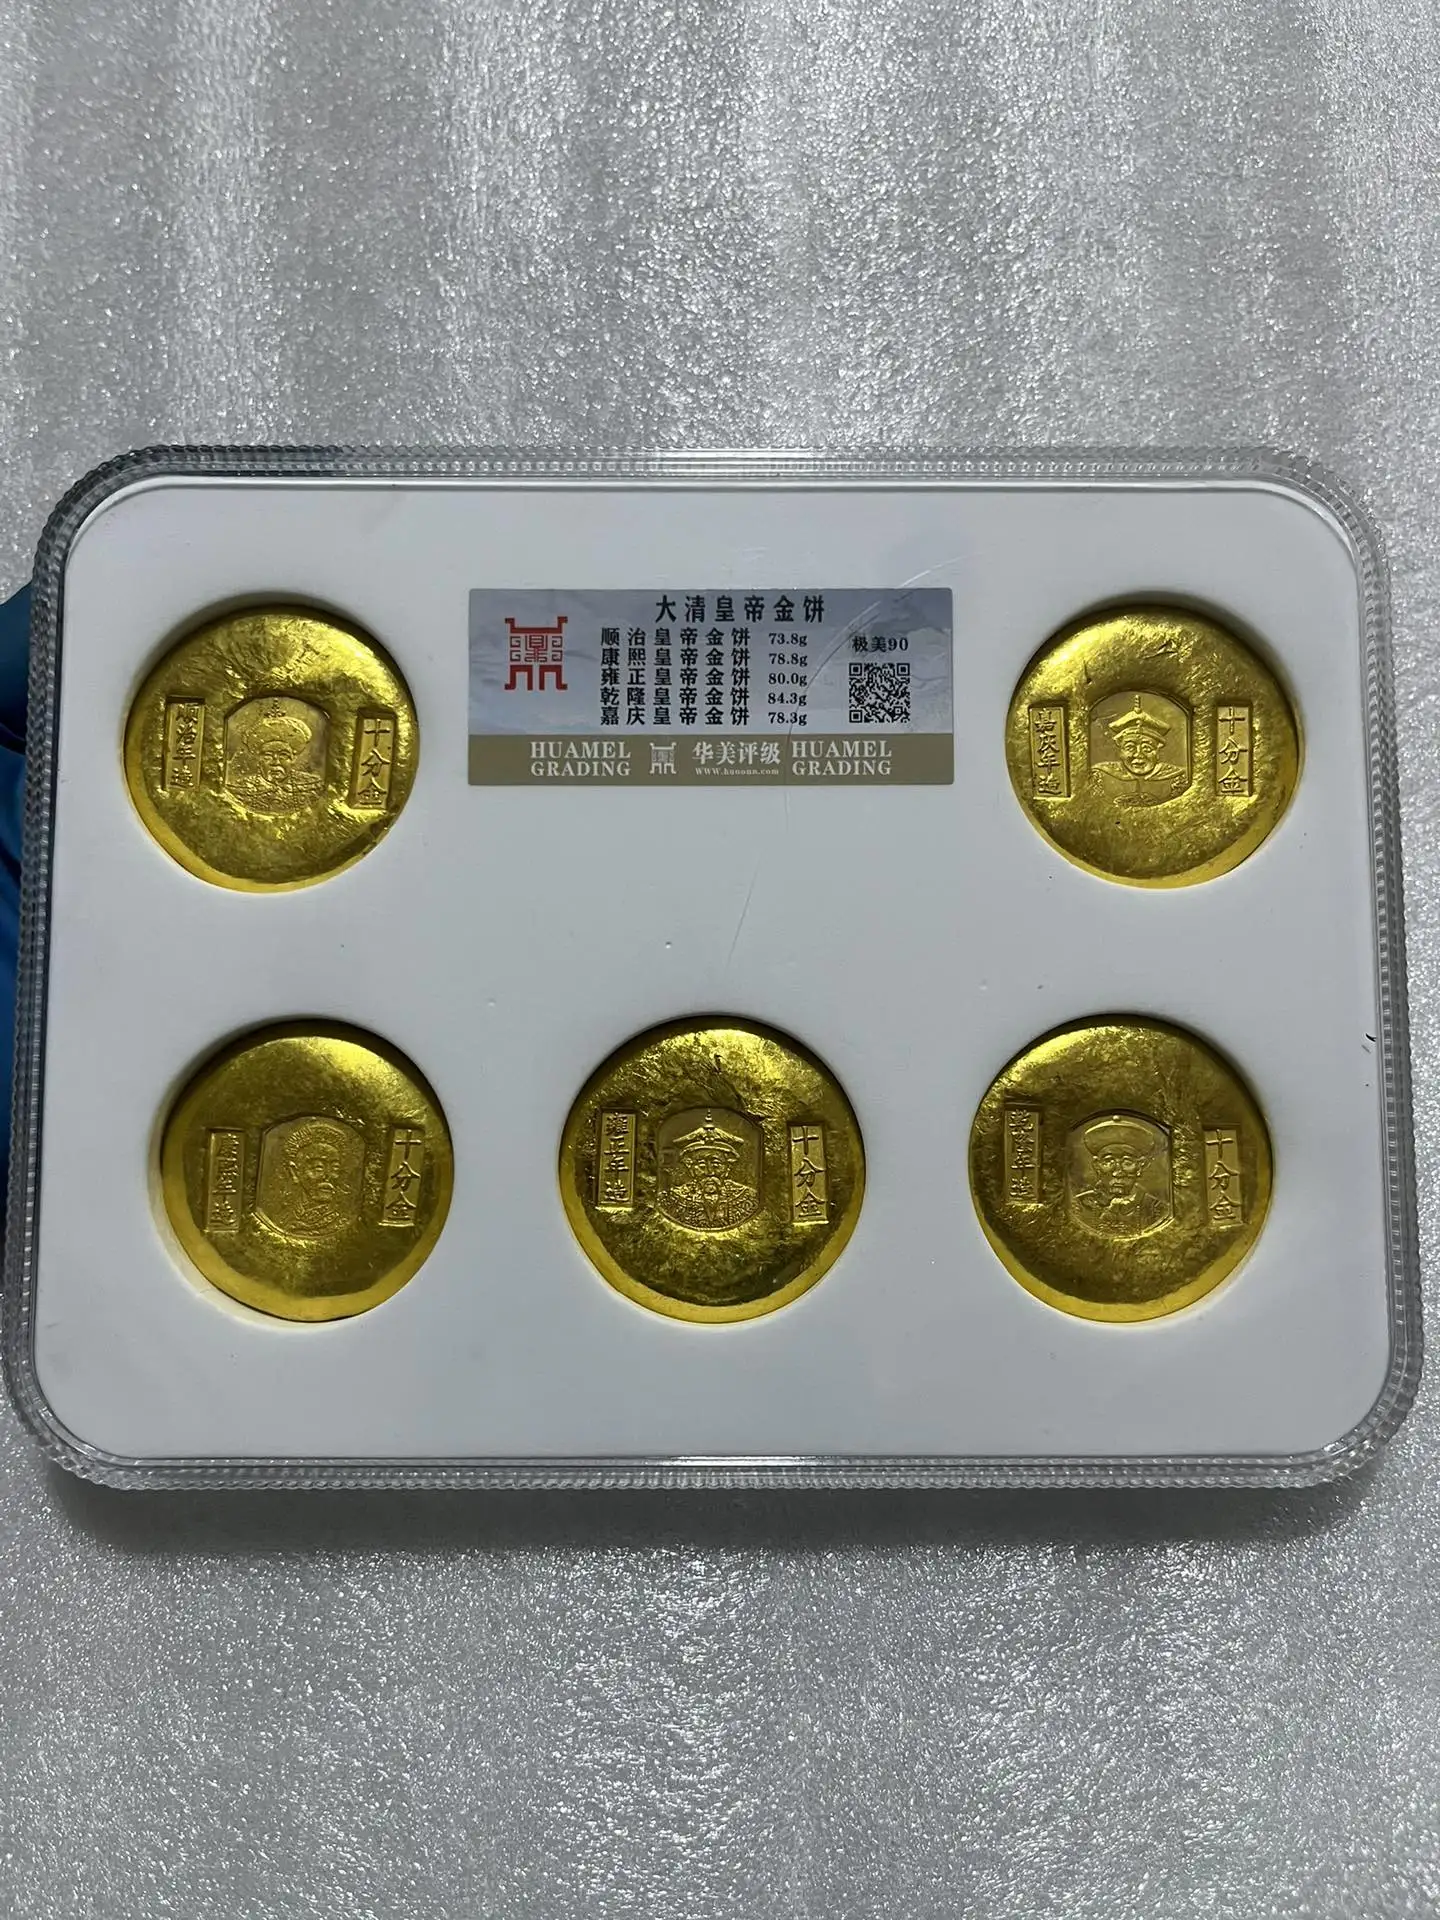 

Rating Five Emperors Ten Gold Round Ingots Copper Gilded Home Crafts Collection Antique Bronze Ware